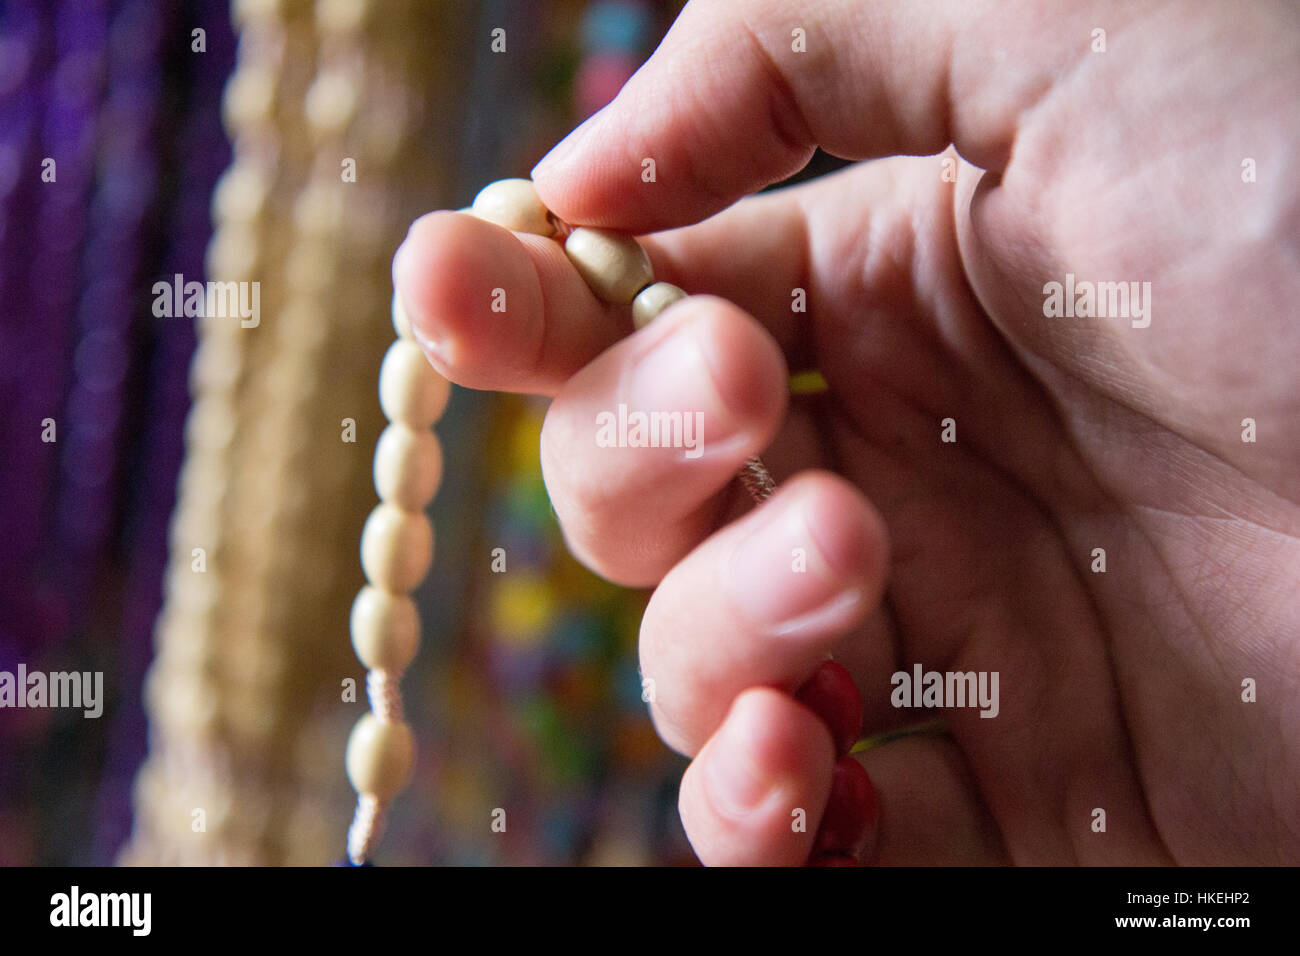 Praying the rosary with the rosary beads in hand Stock Photo